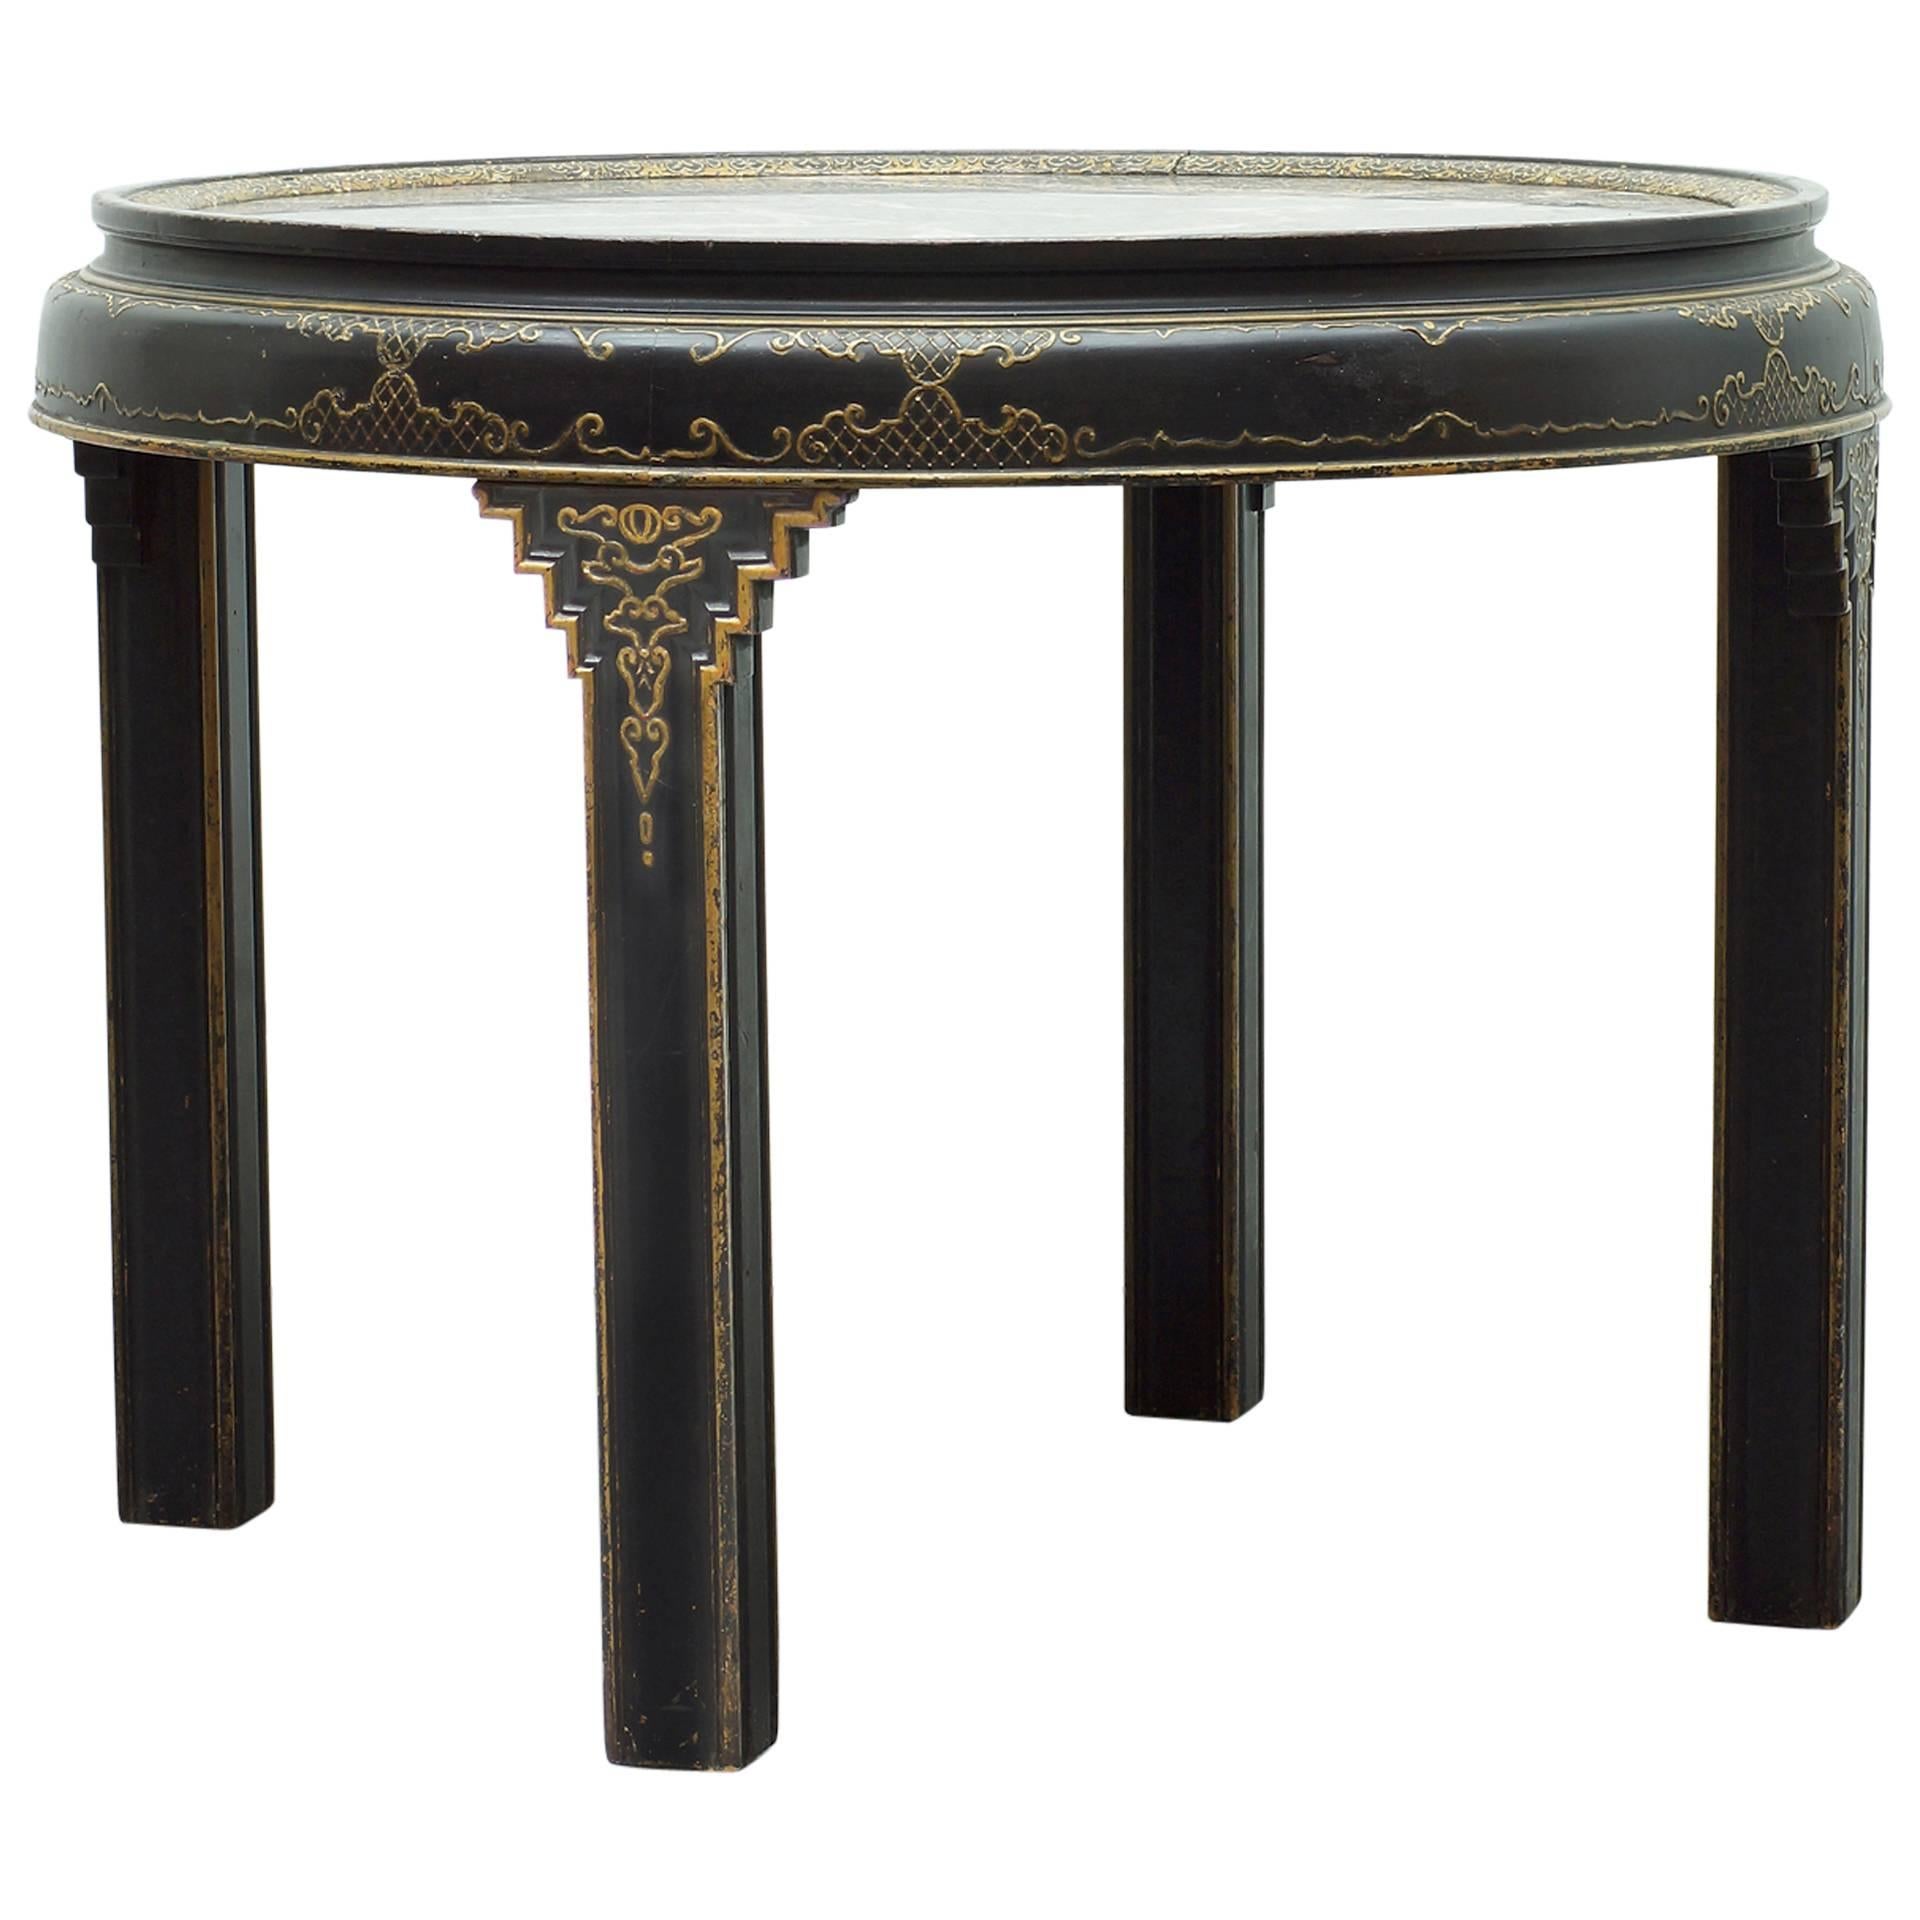 A Marble Chinoiserie Art Deco Table by Peter Baumann For Sale